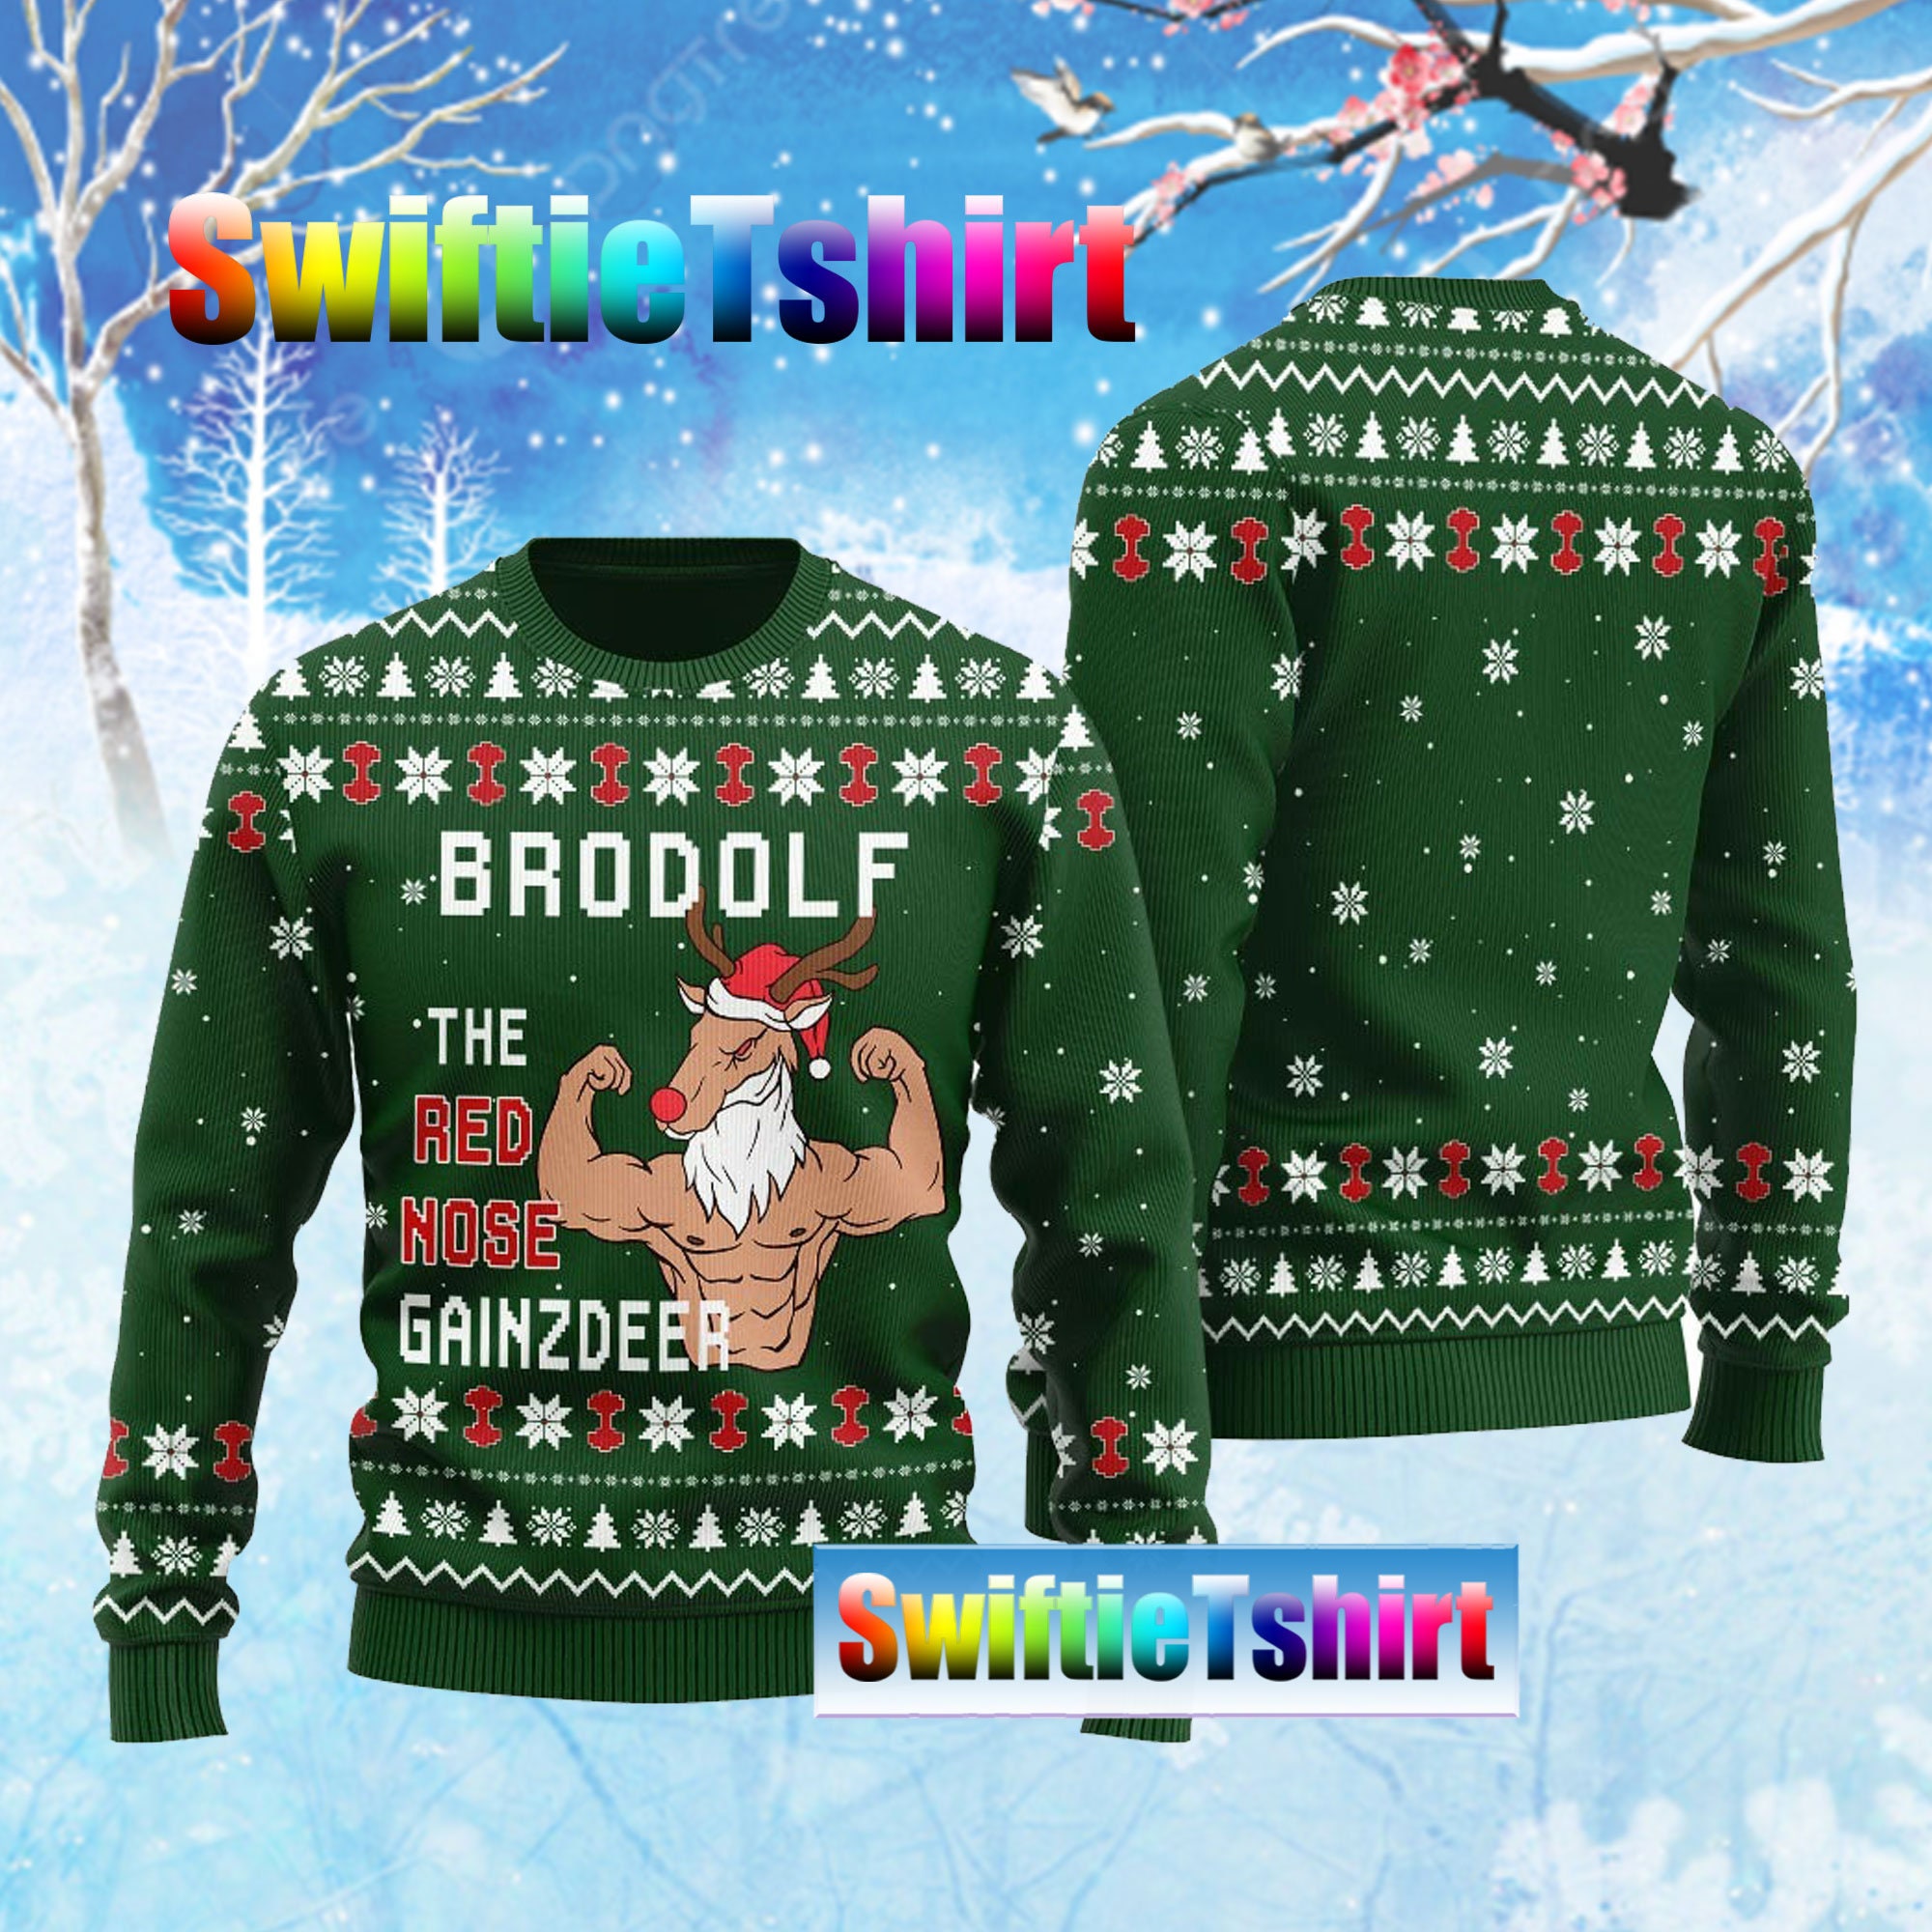 Discover Brodolf The Red Nose Gainzdeer Gym Ugly Christmas All Over Print Sweater Apparel